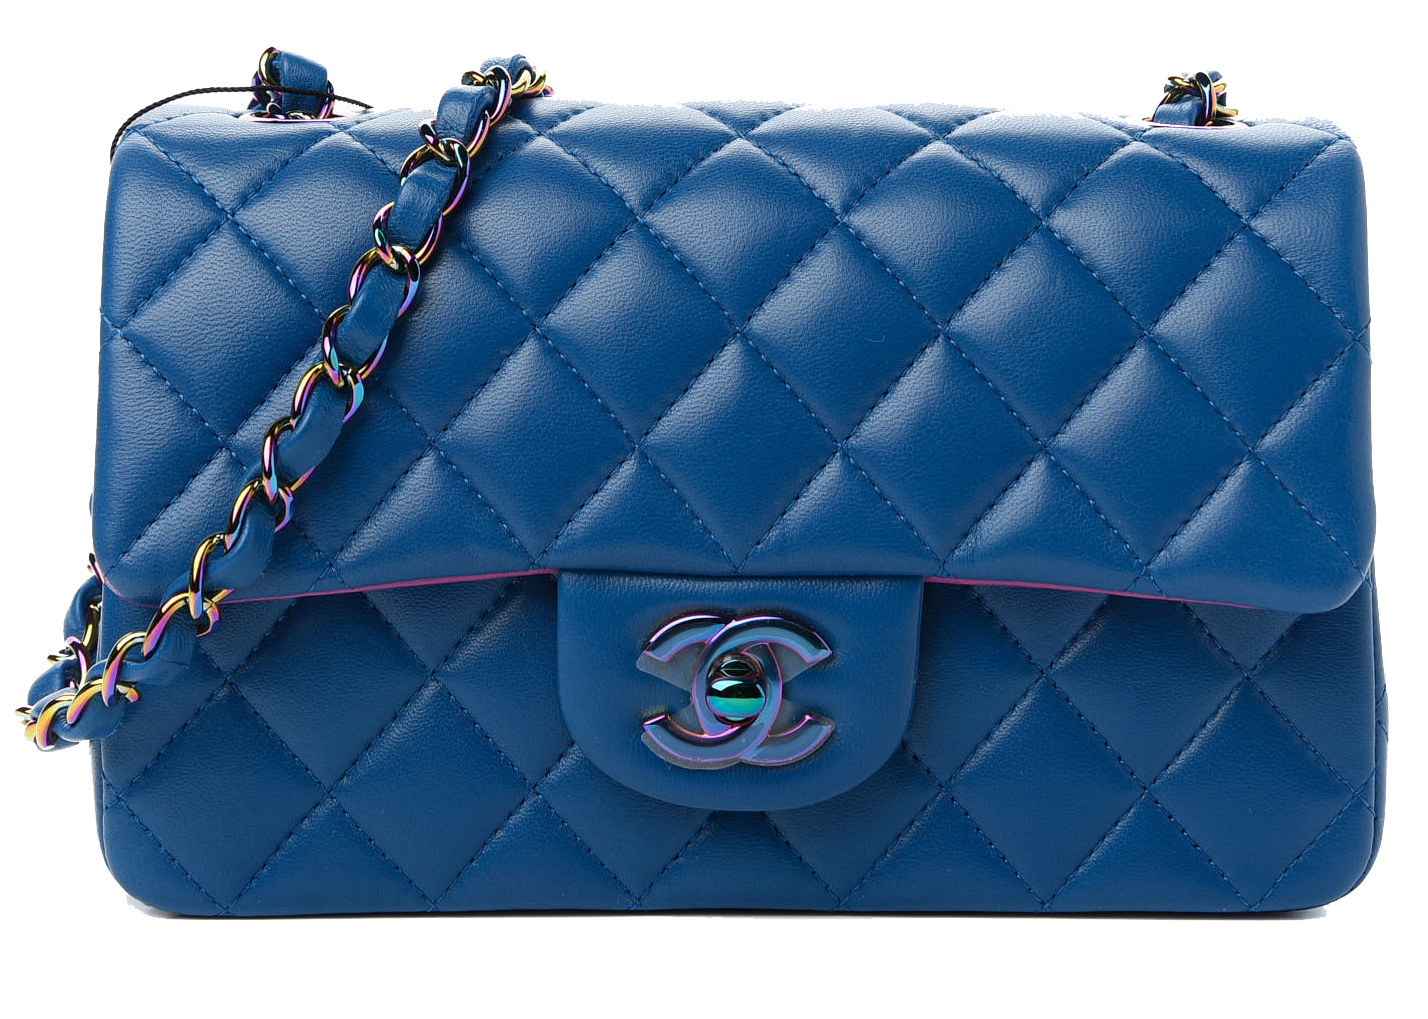 A BLUE IRIDESCENT LAMBSKIN LEATHER SMALL CLASSIC FLAP BAG  A SET OF TWO  CARD HOLDERS CHANEL 2019  Christies